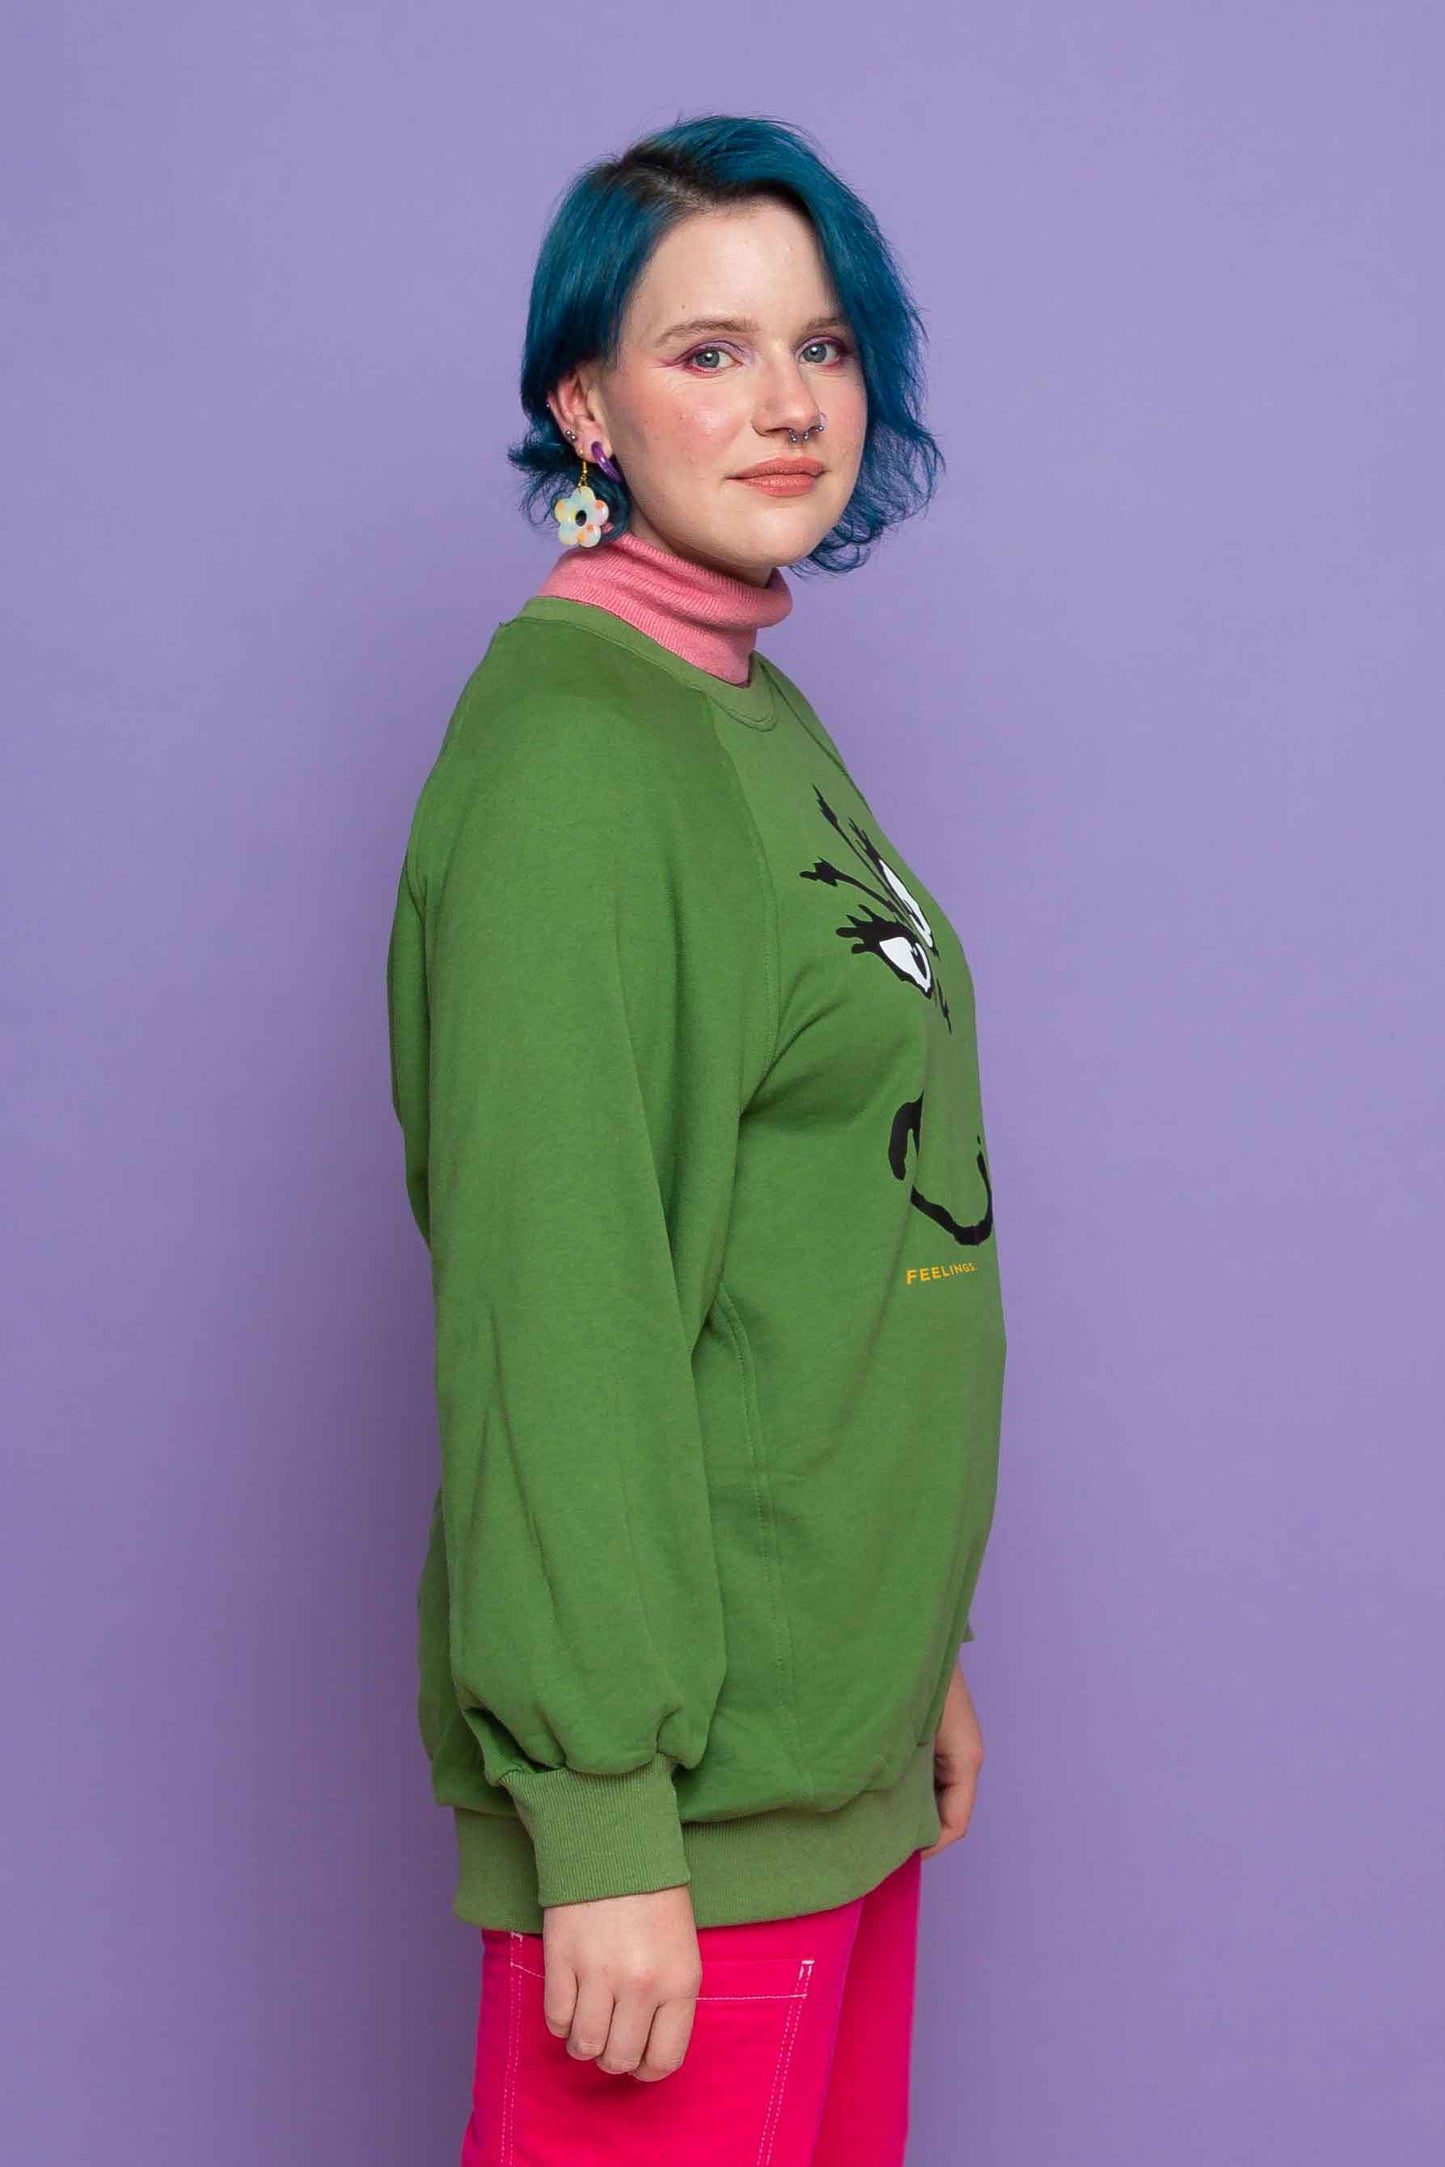 This is The Remix Sweatshirt FEELINGS (Inspired by THE GRINCH) - Oversized Vintage Christmas Sweatshirt in Green